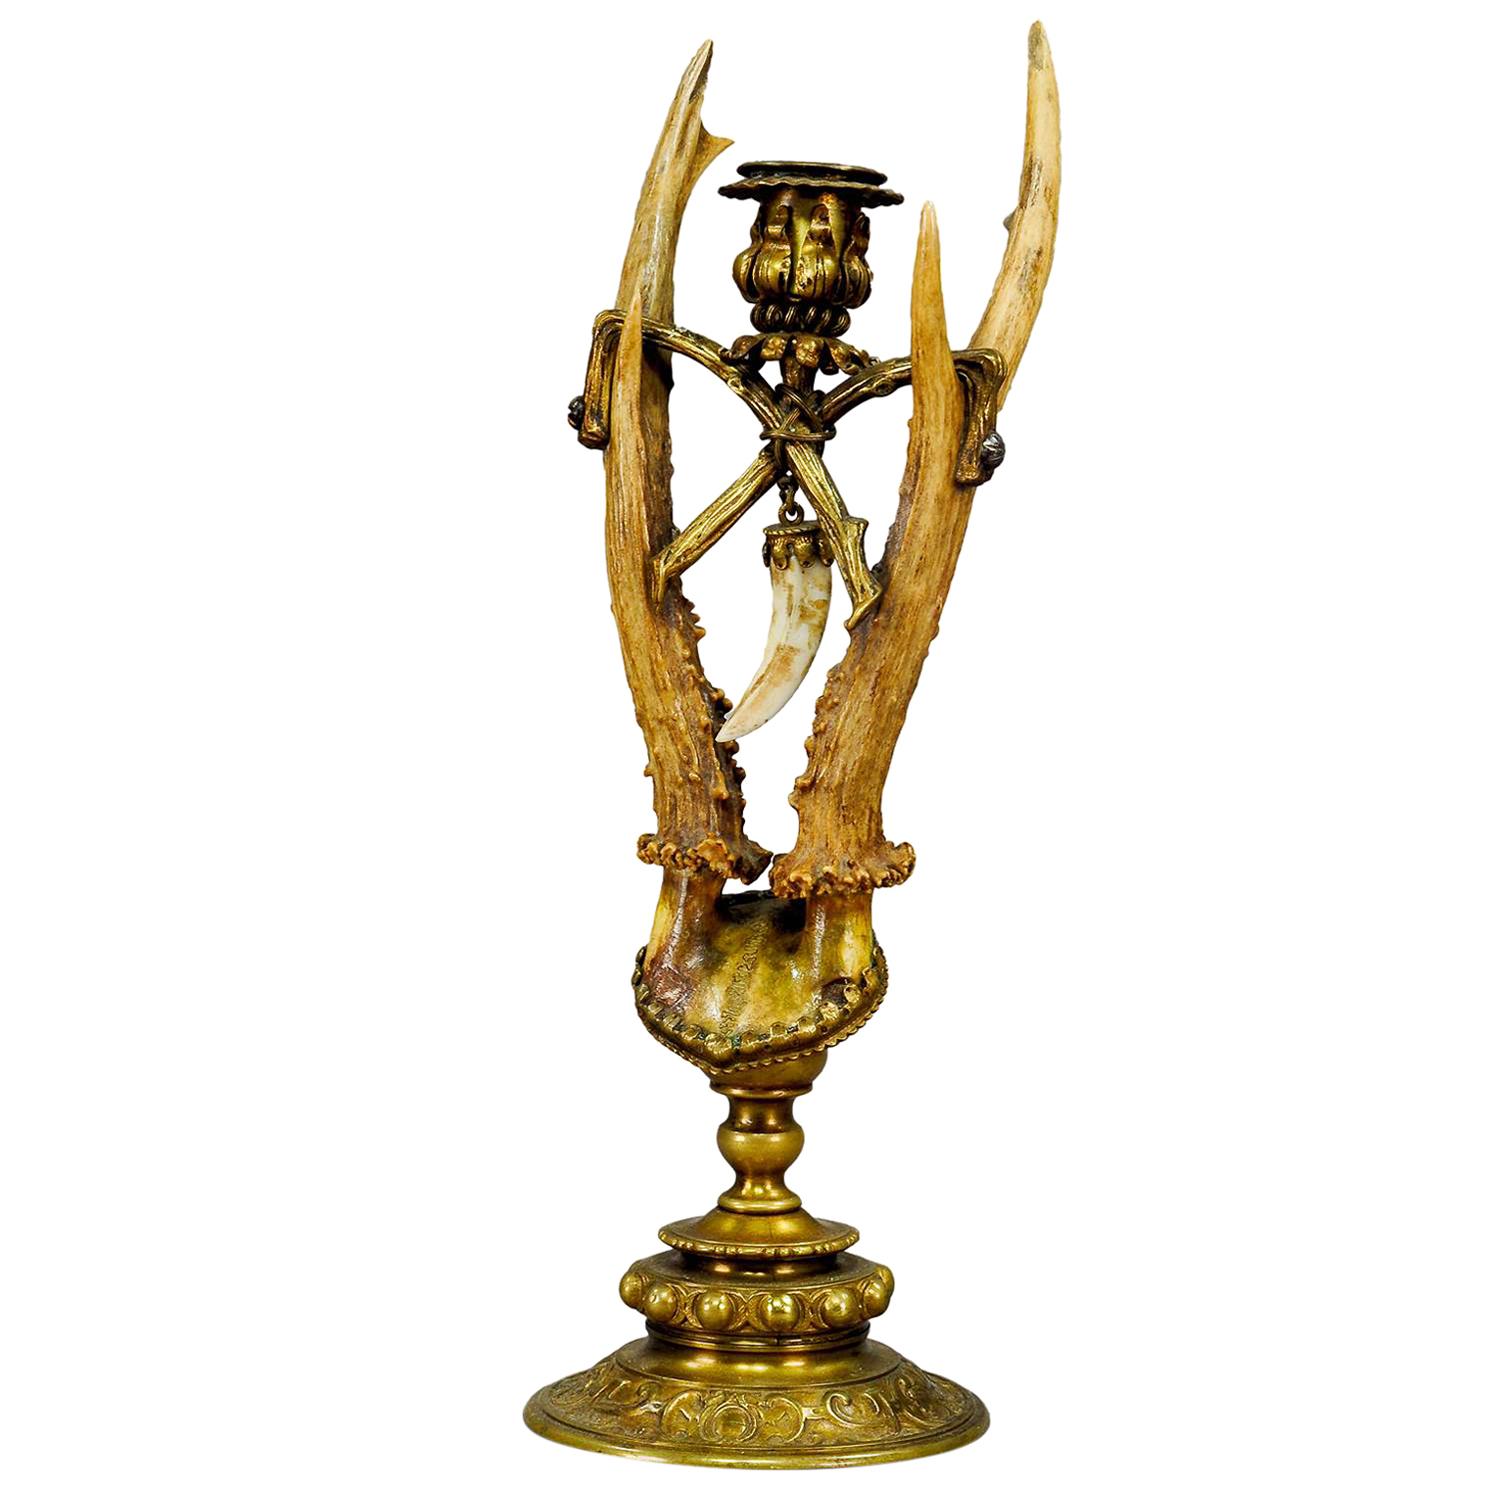 Lodge Style Antler Candleholder with Handforged Brass Base, circa 1880 For Sale